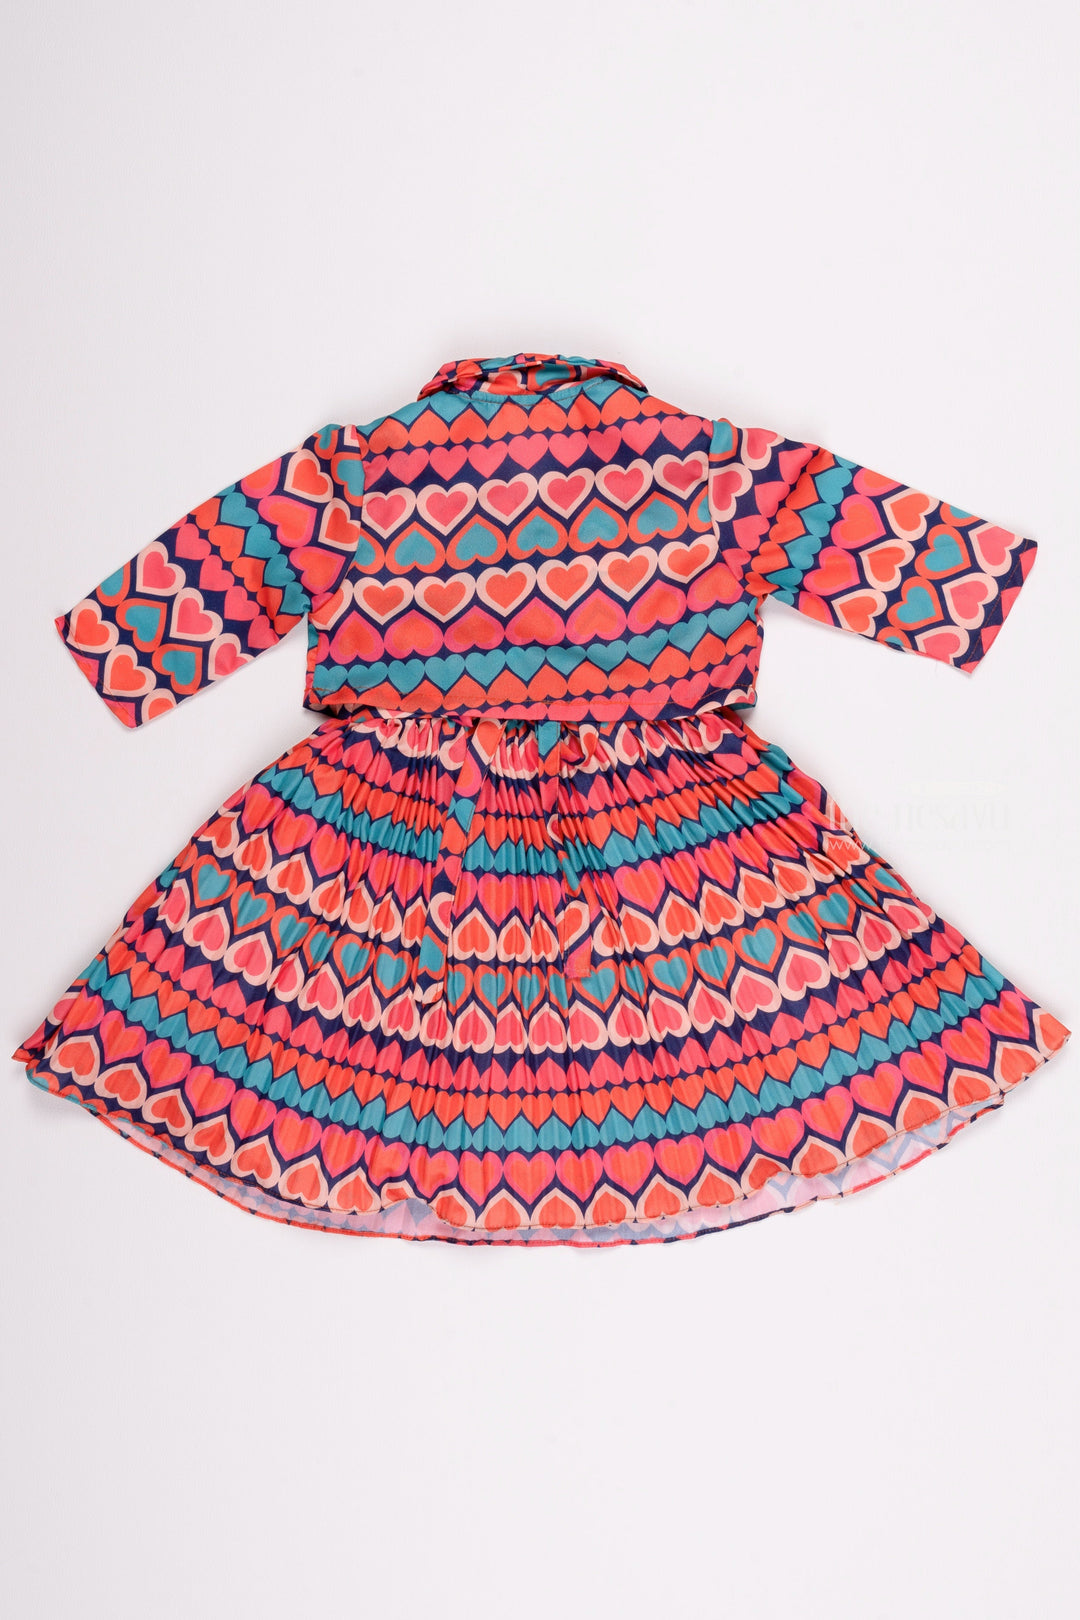 The Nesavu Girls Fancy Frock Pretty in Pink: Latest Frock Designs - Pleated Fancy Frock with Collared Overcoat for Girls Nesavu Cotton Frocks with Elegant Heart Print | Adorable Baby Fancy Wear Collection | The Nesavu